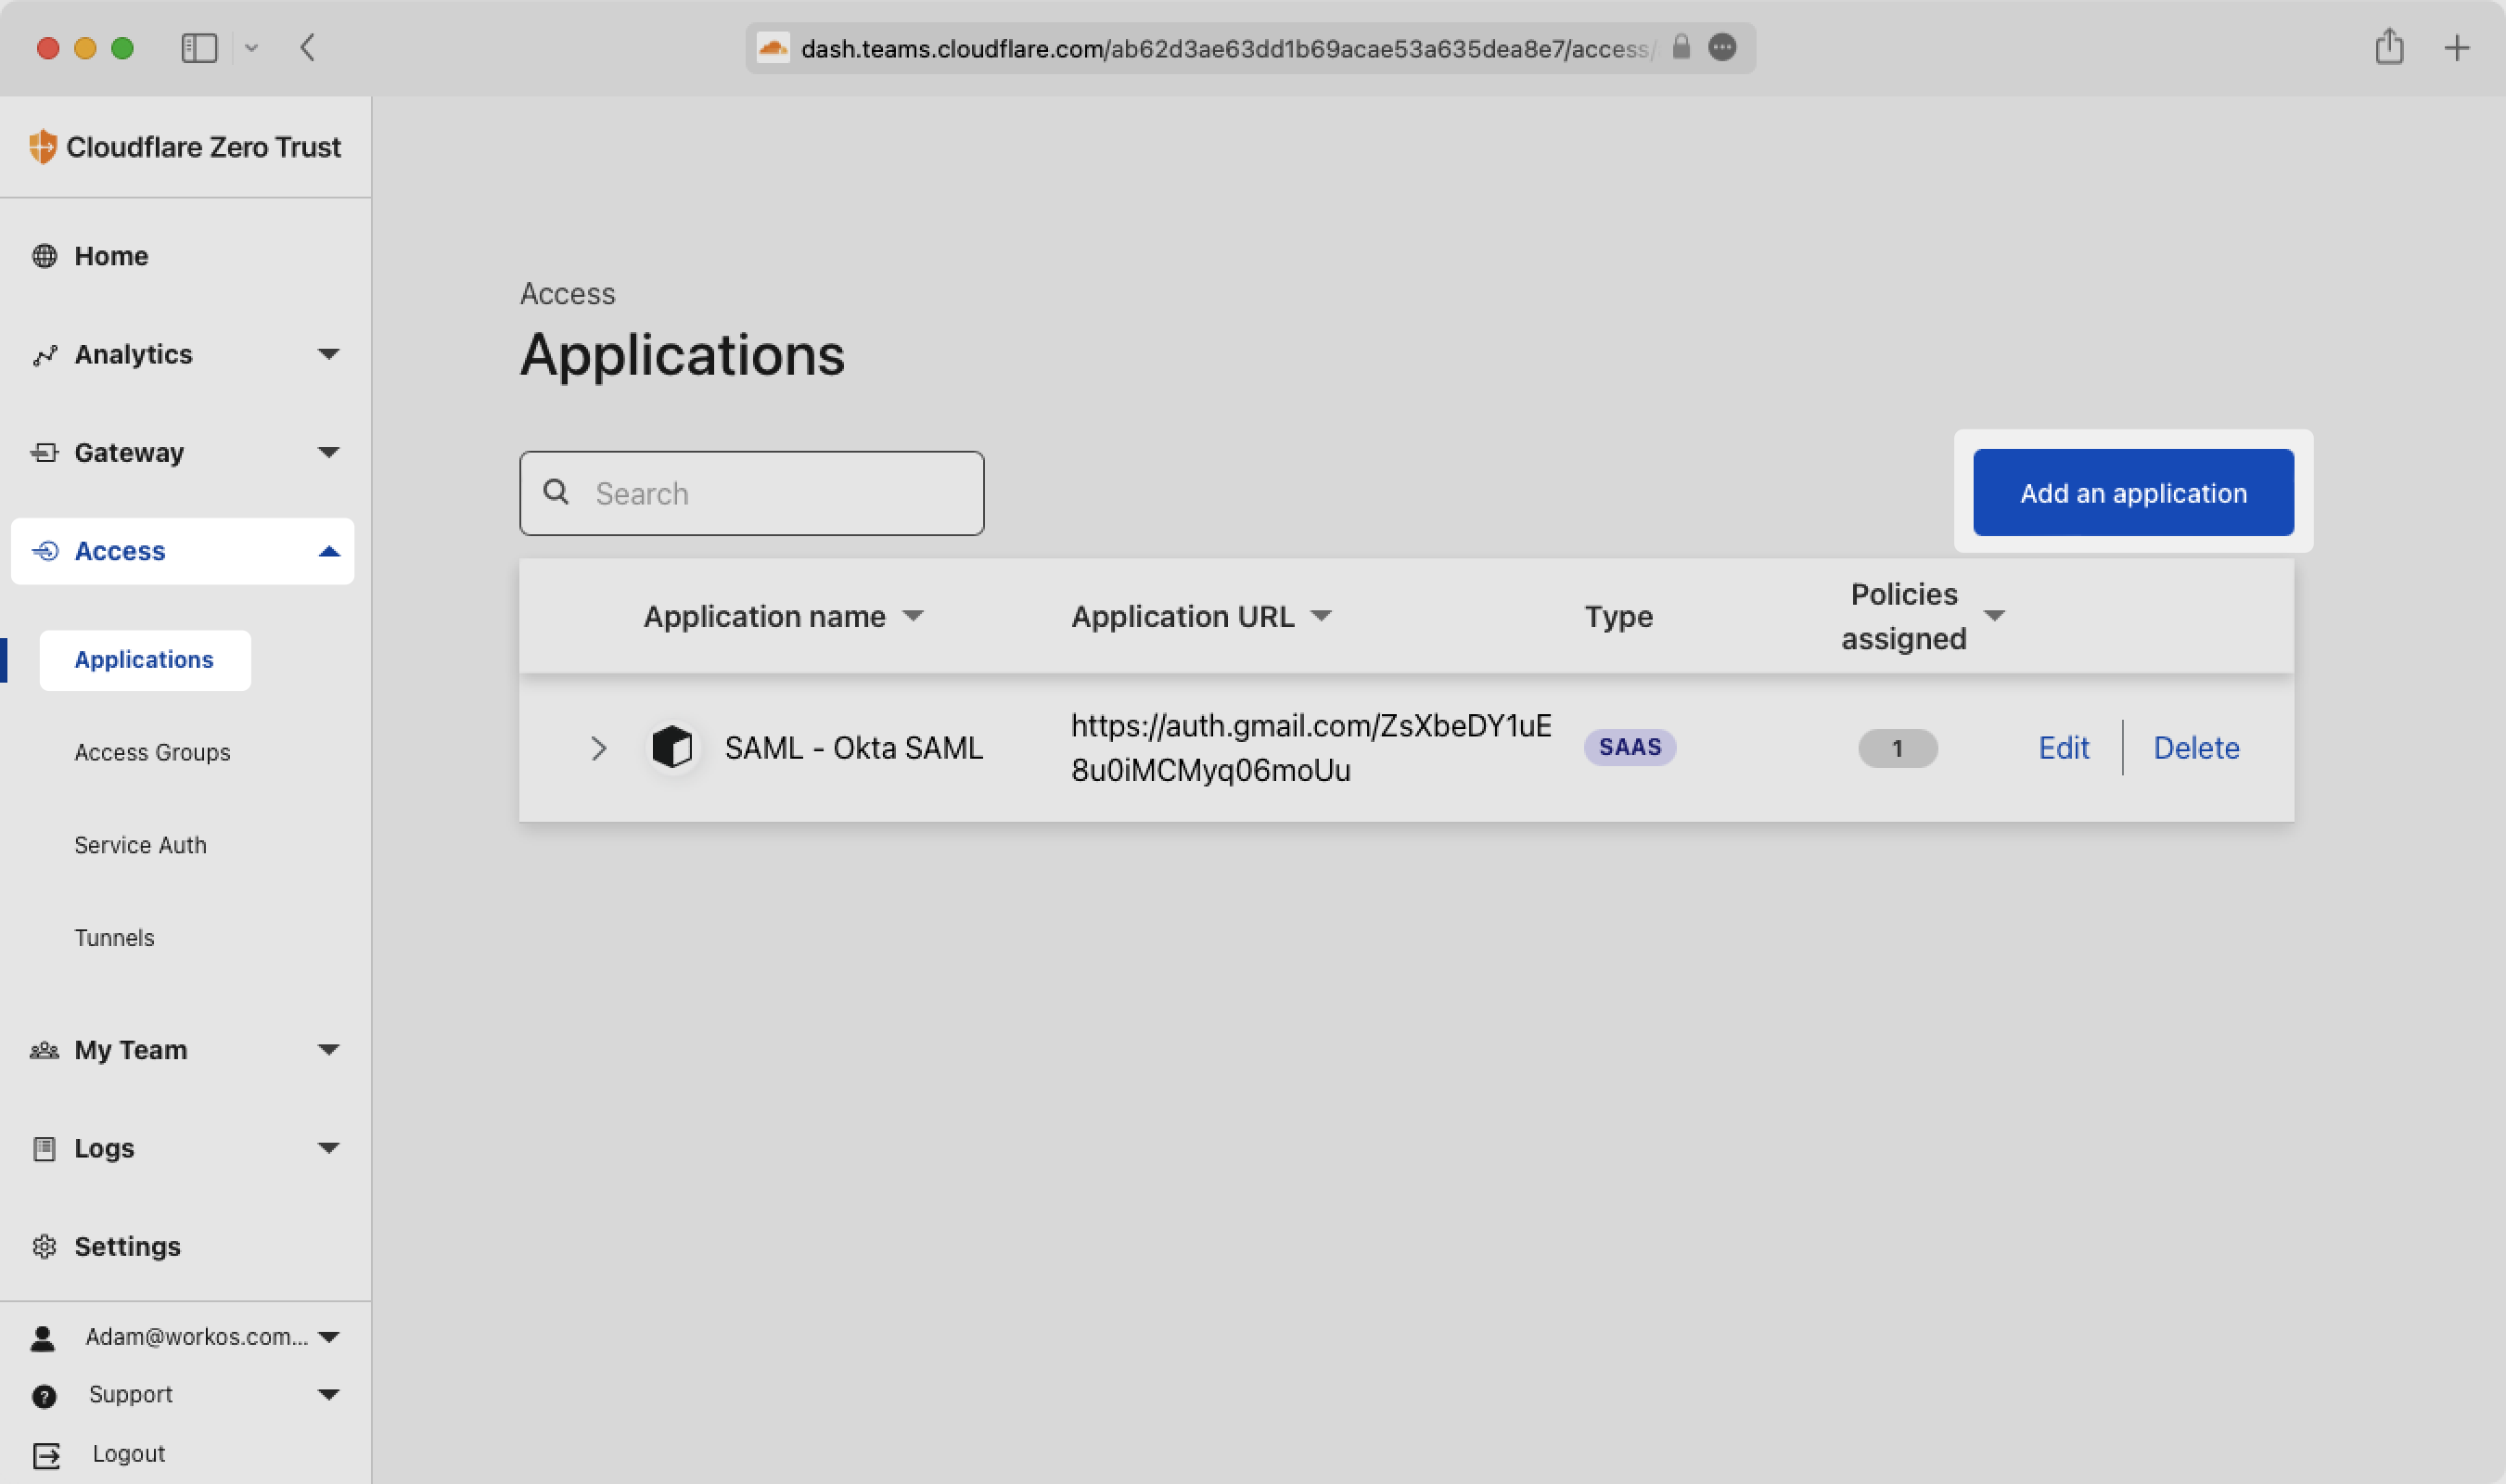 Add Application in Cloudflare